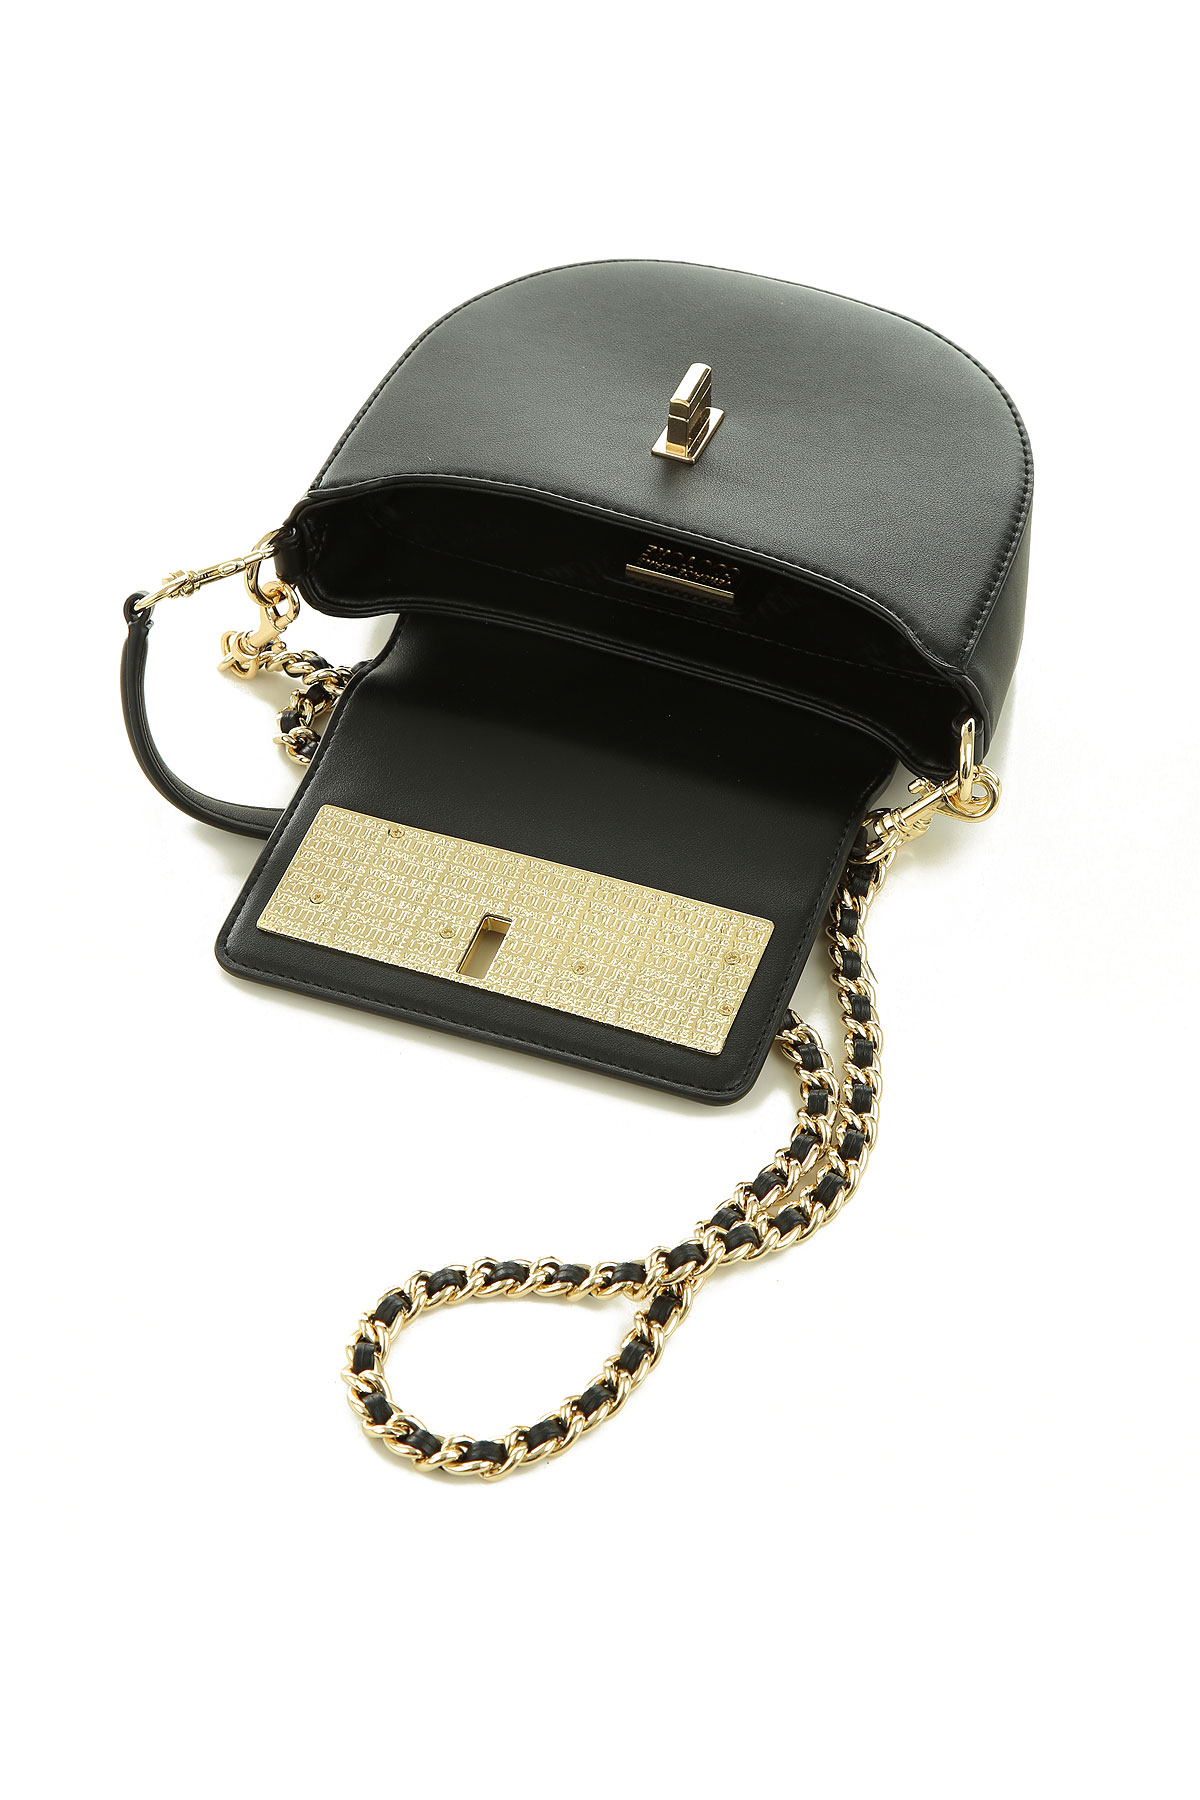 Handbags Versace Jeans Couture , Style code: 73va4bf7-zs413-899